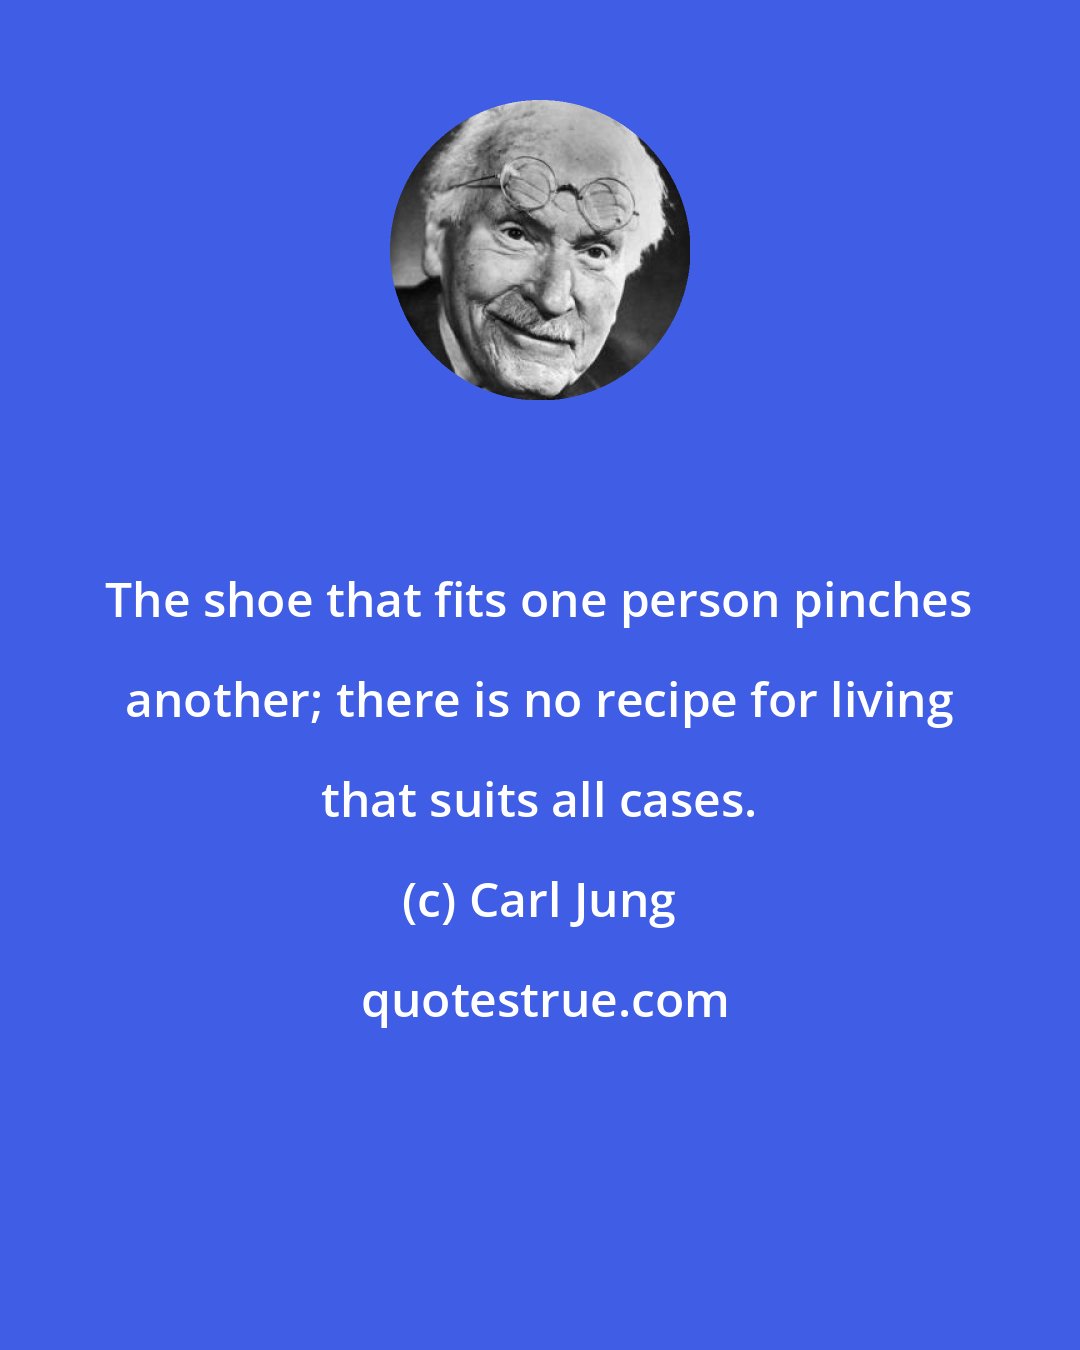 Carl Jung: The shoe that fits one person pinches another; there is no recipe for living that suits all cases.